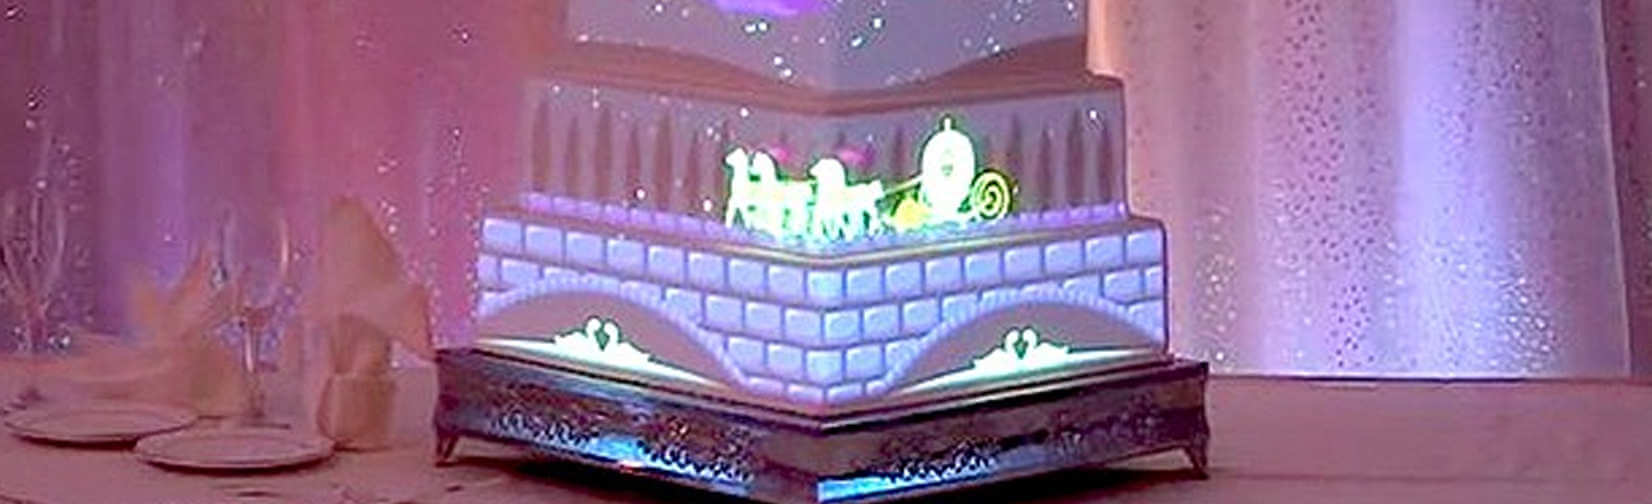 a tiered wedding cake with animations projected onto its surface.